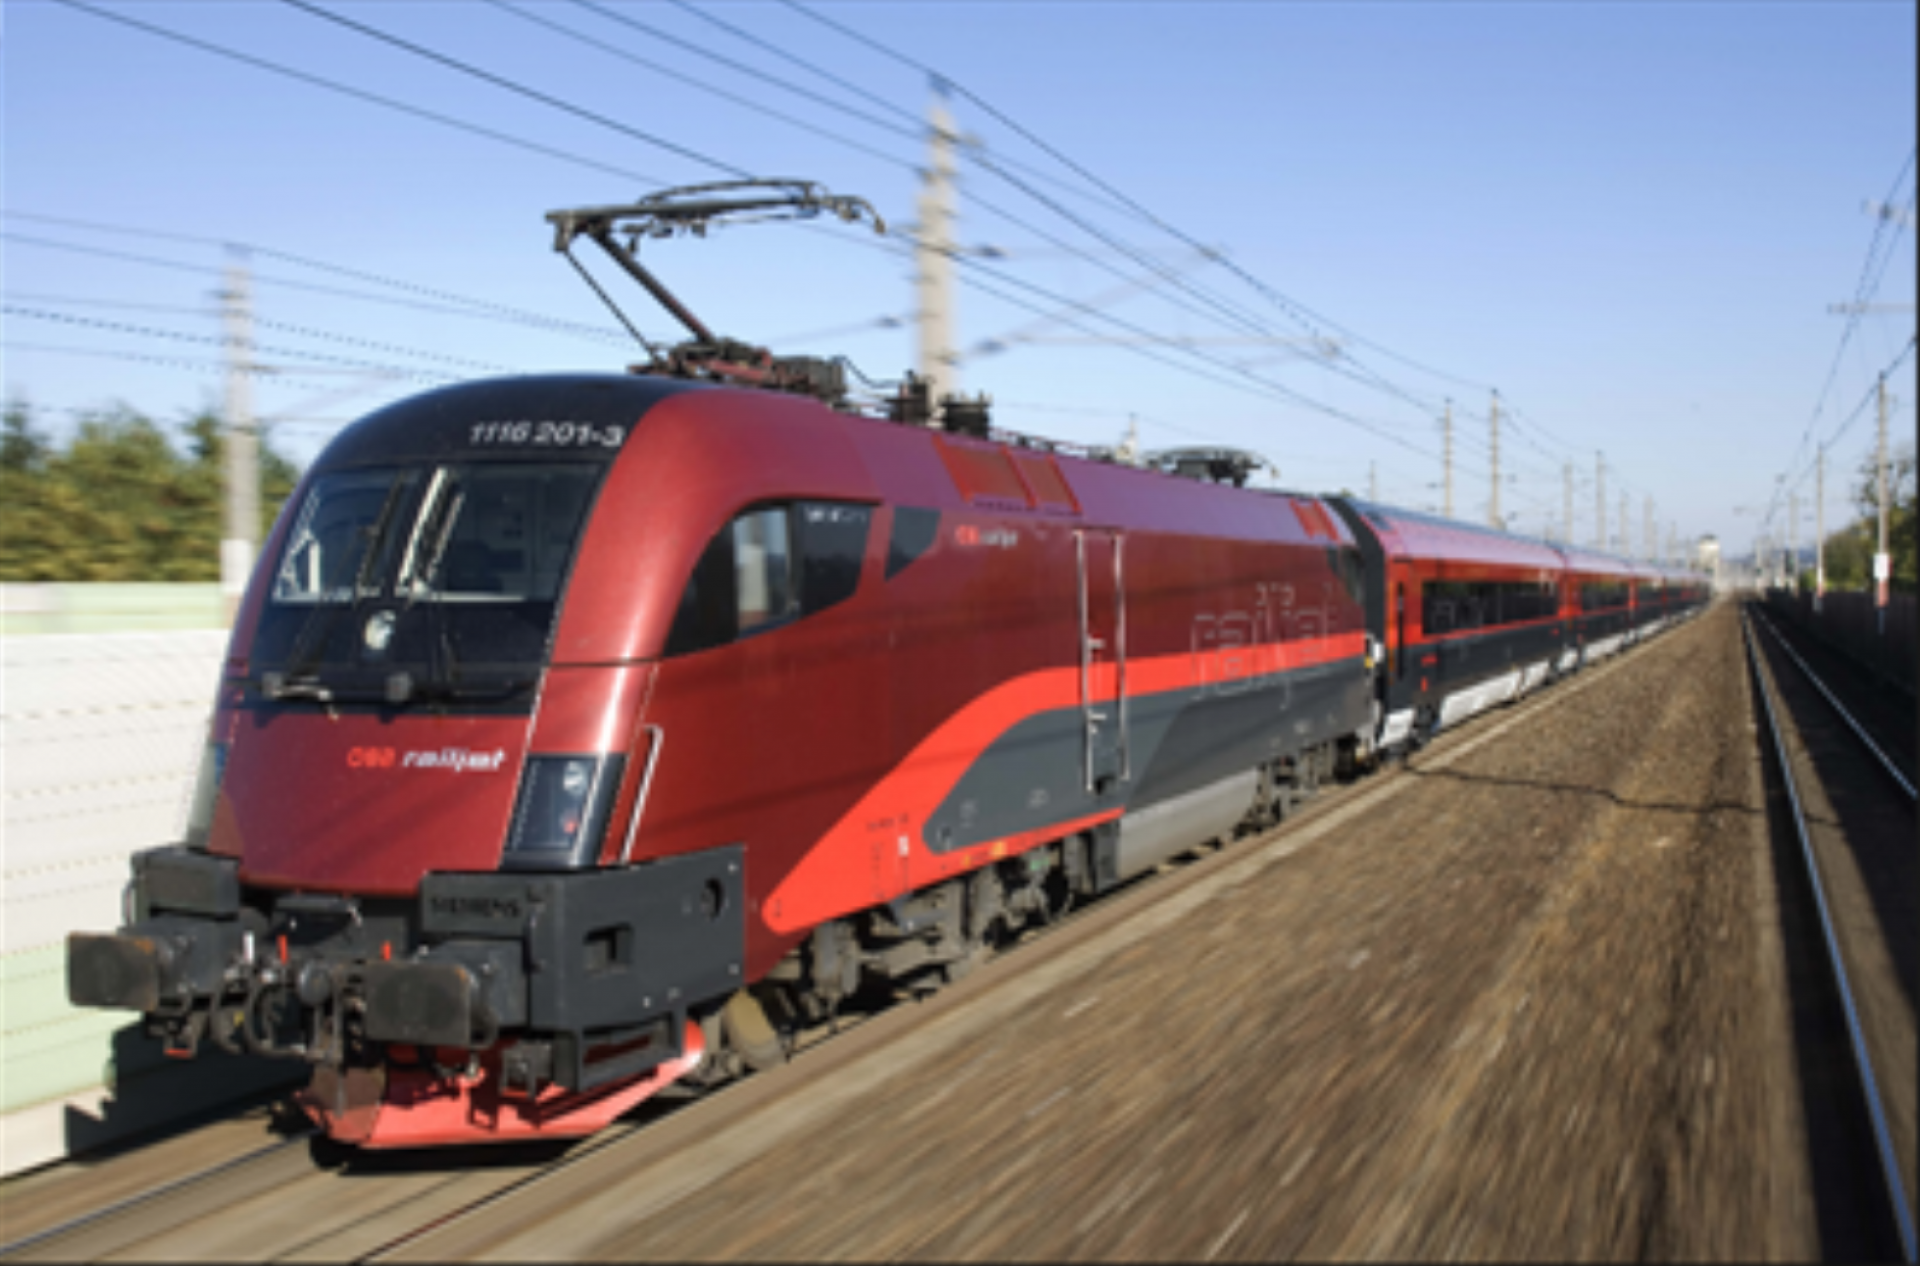 eco2jet - energy-efficient, cost-efficient and eco-friendly HVAC system using R744 through the ÖBB railjet